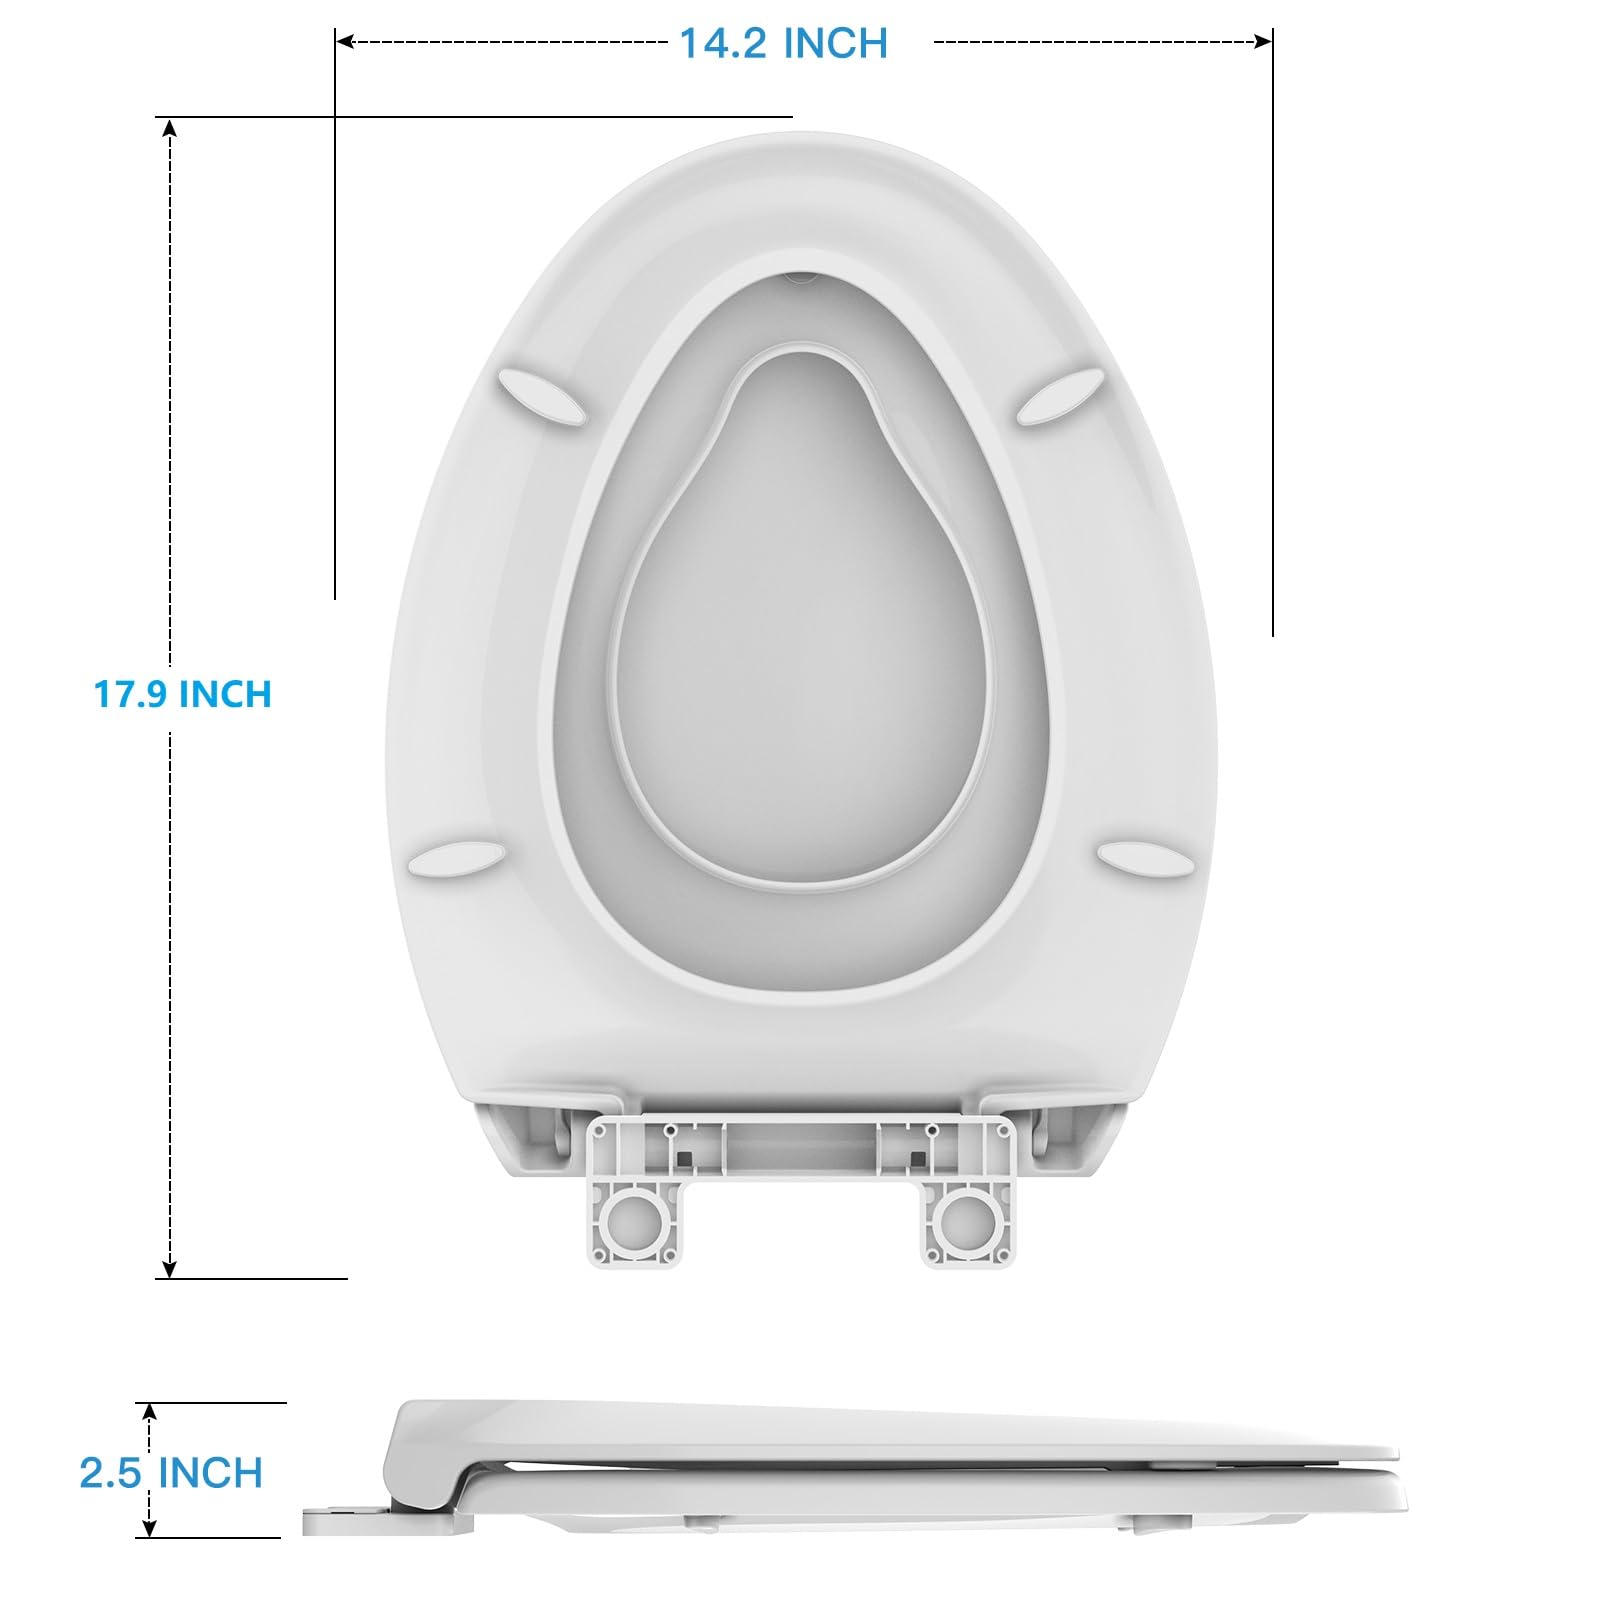 Toilet Seat, Elongated Toilet Seat with Toddler Seat Built in, Potty Training Toilet Seat Elongated Fits Both Adult and Child, with Slow Close and Magnets- Elongated